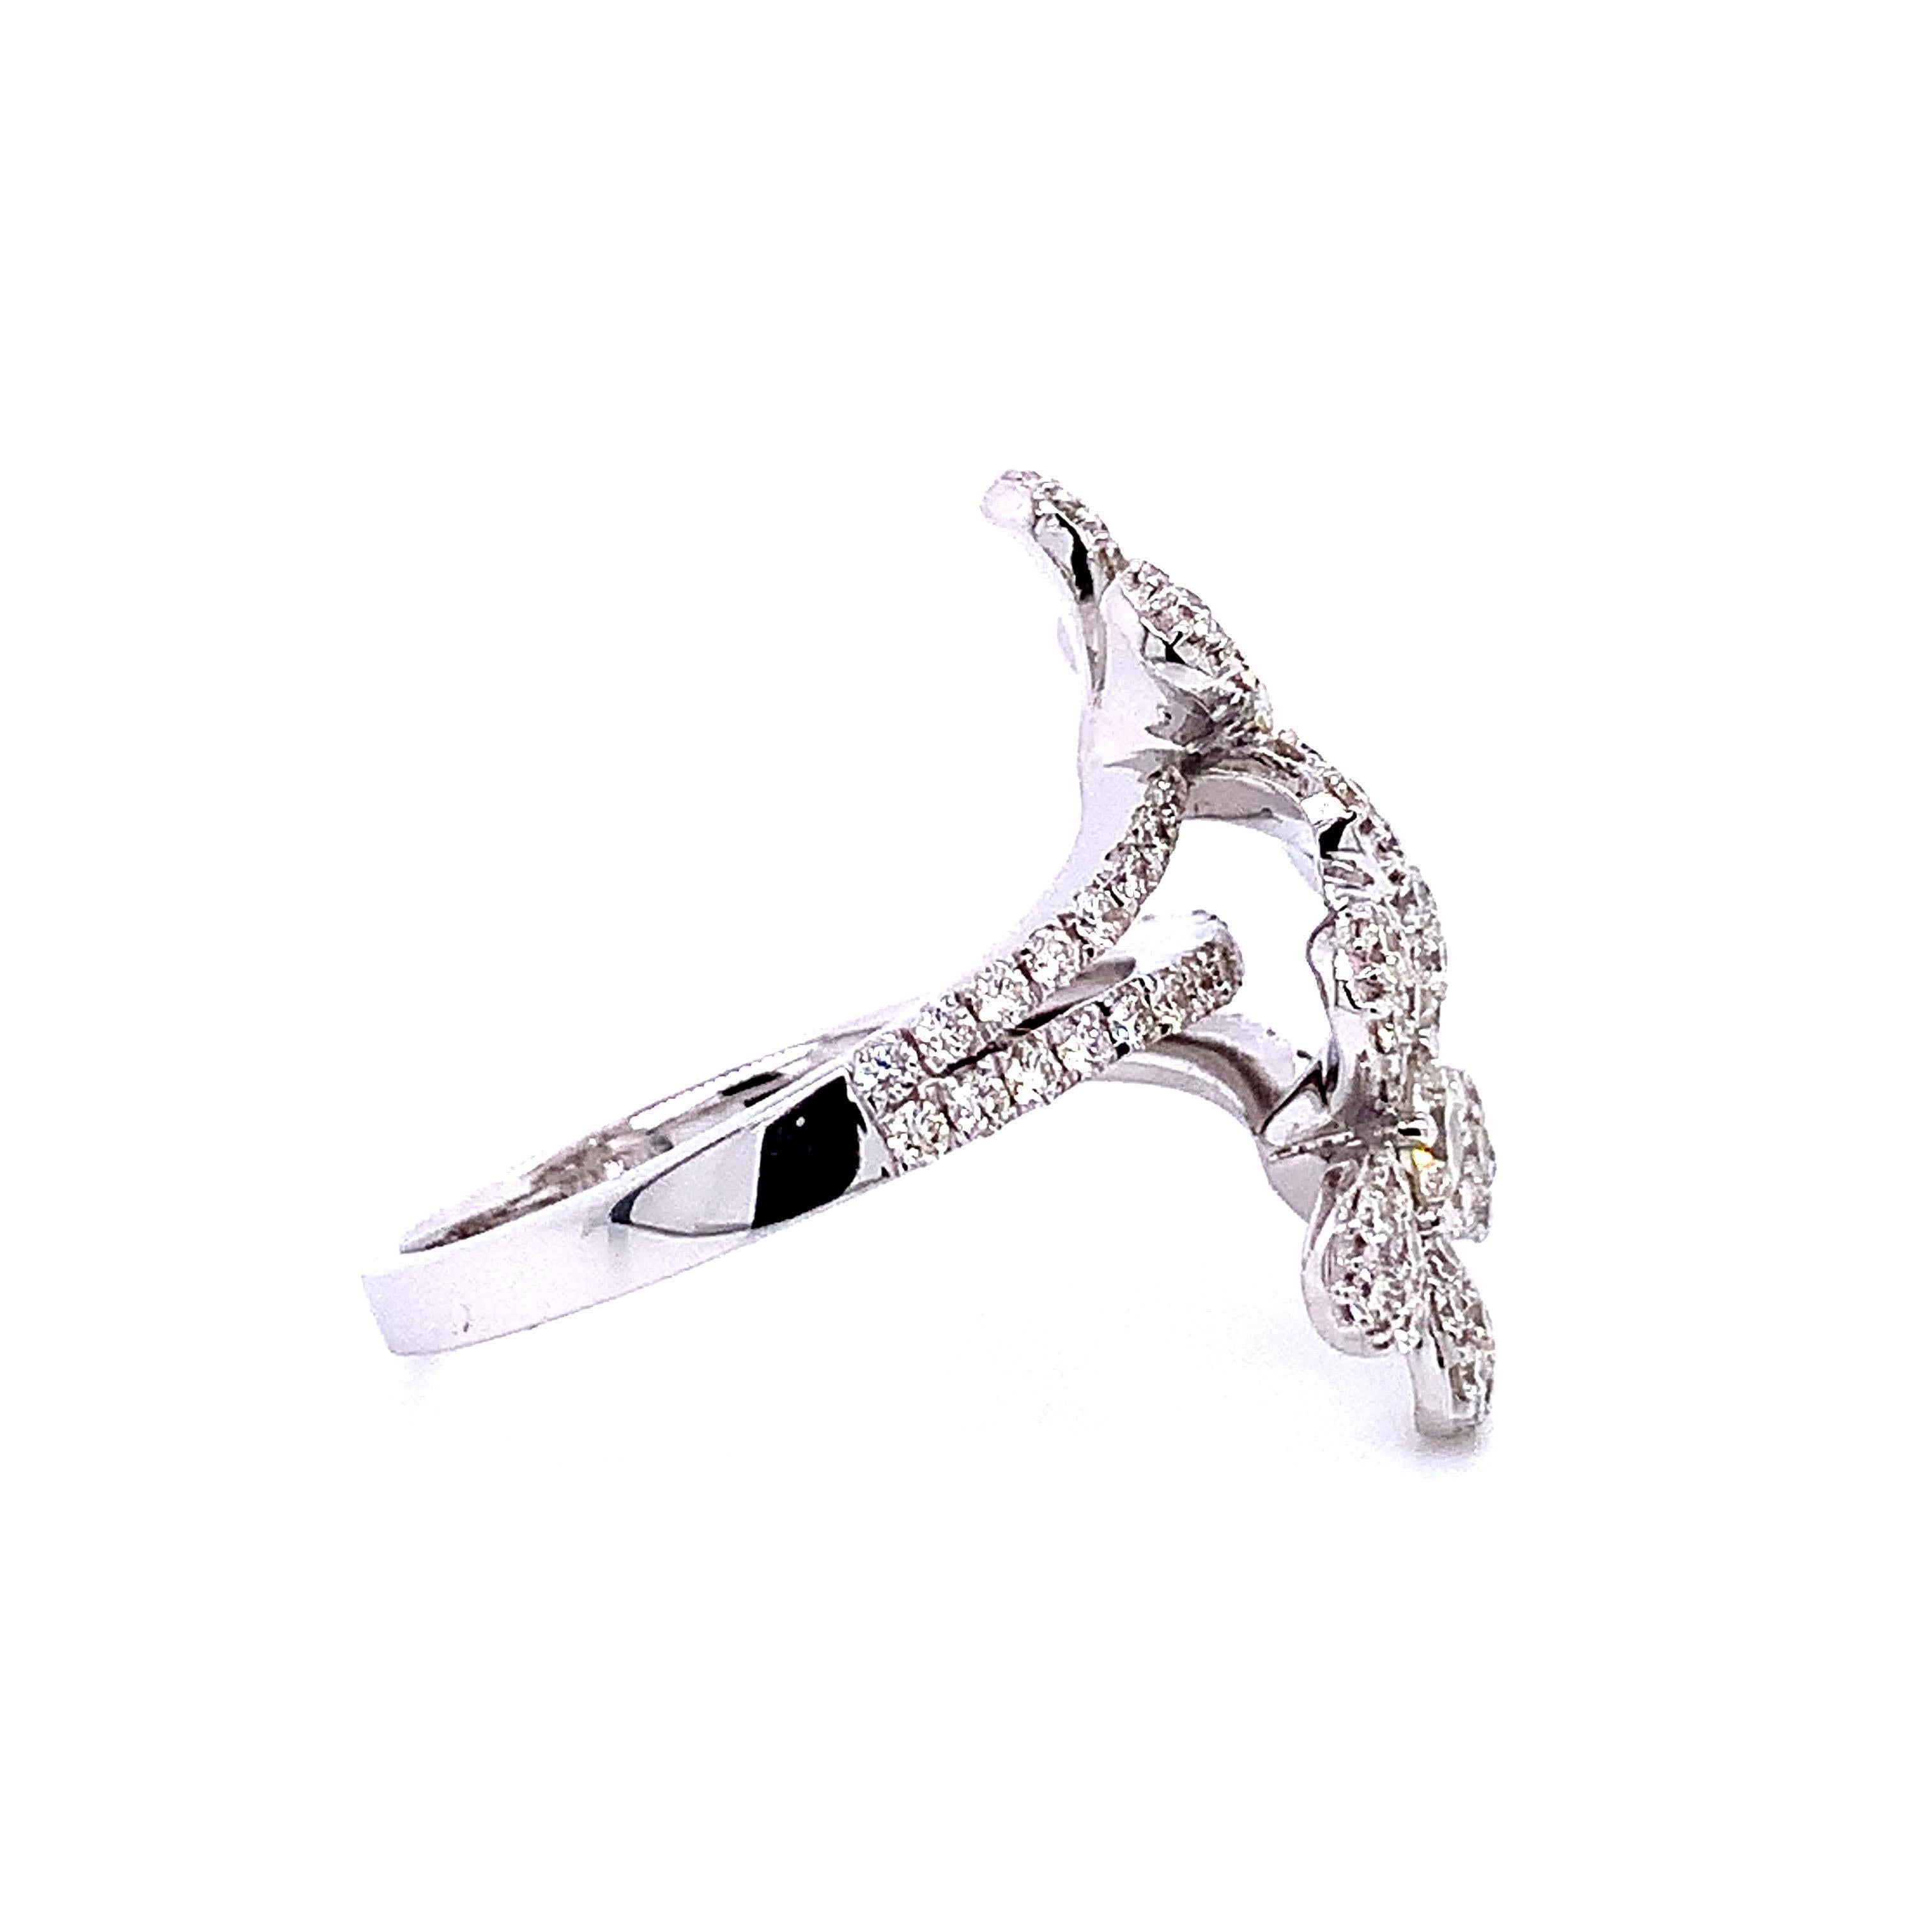 14 Karat White Gold Double Flower Cocktail Ring with 119 Round Cut Diamonds 1.55 Carat Total Diamond Weight with center stones in prong setting and side stones in pave setting.

Perfect piece of jewelry to match any outfit, and sturdy for everyday